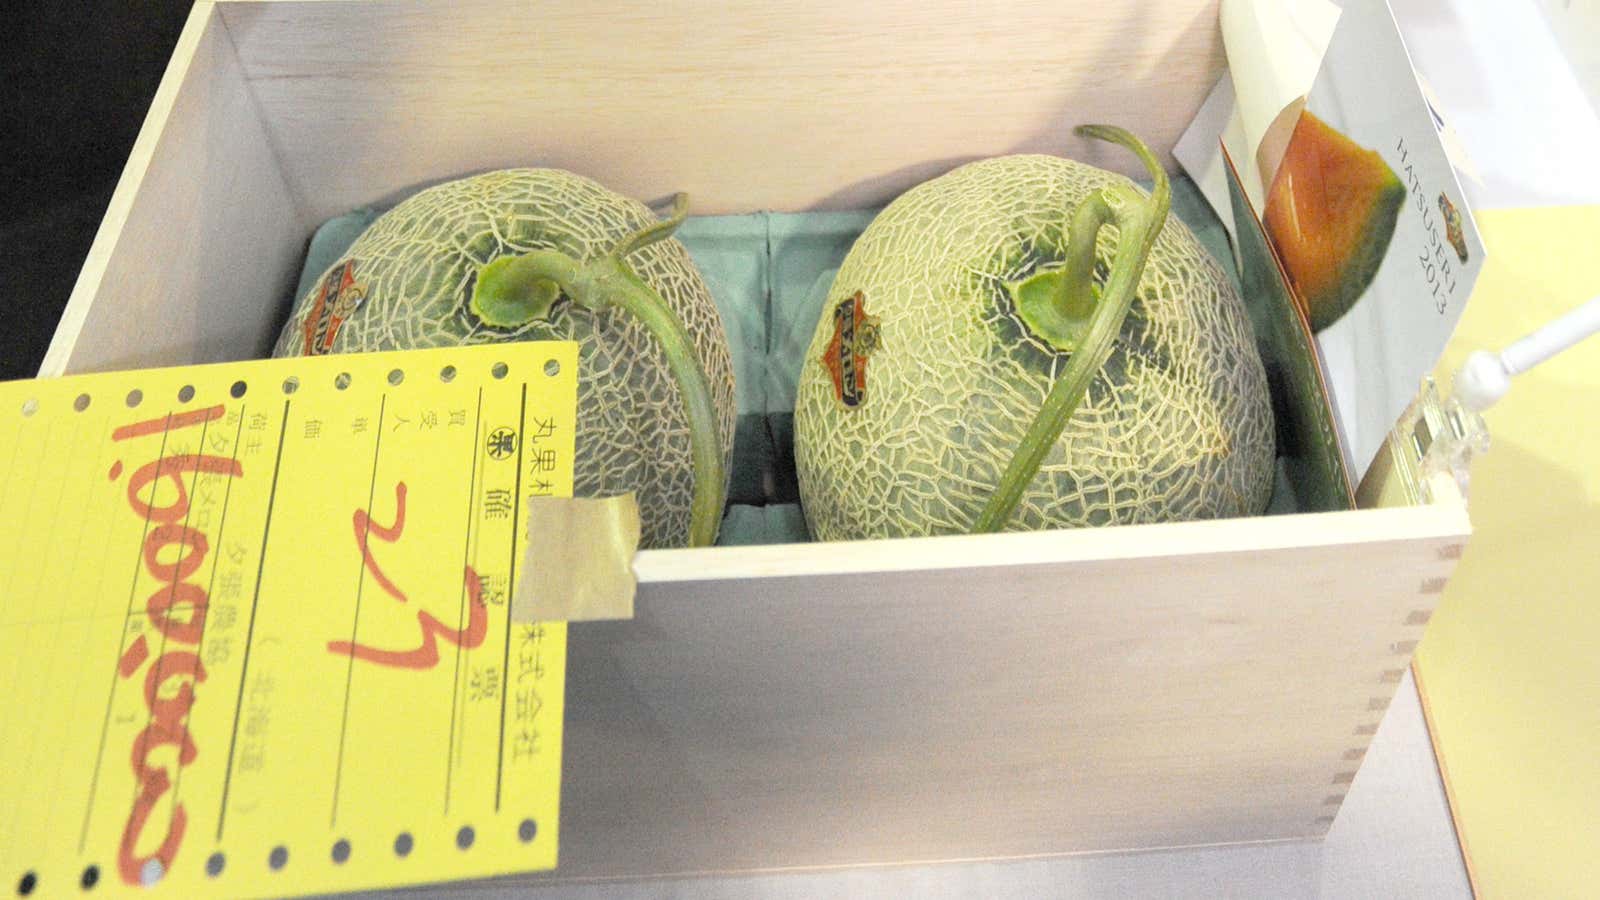 This pair of melons went for 1.6 million yen in May—the third highest price.